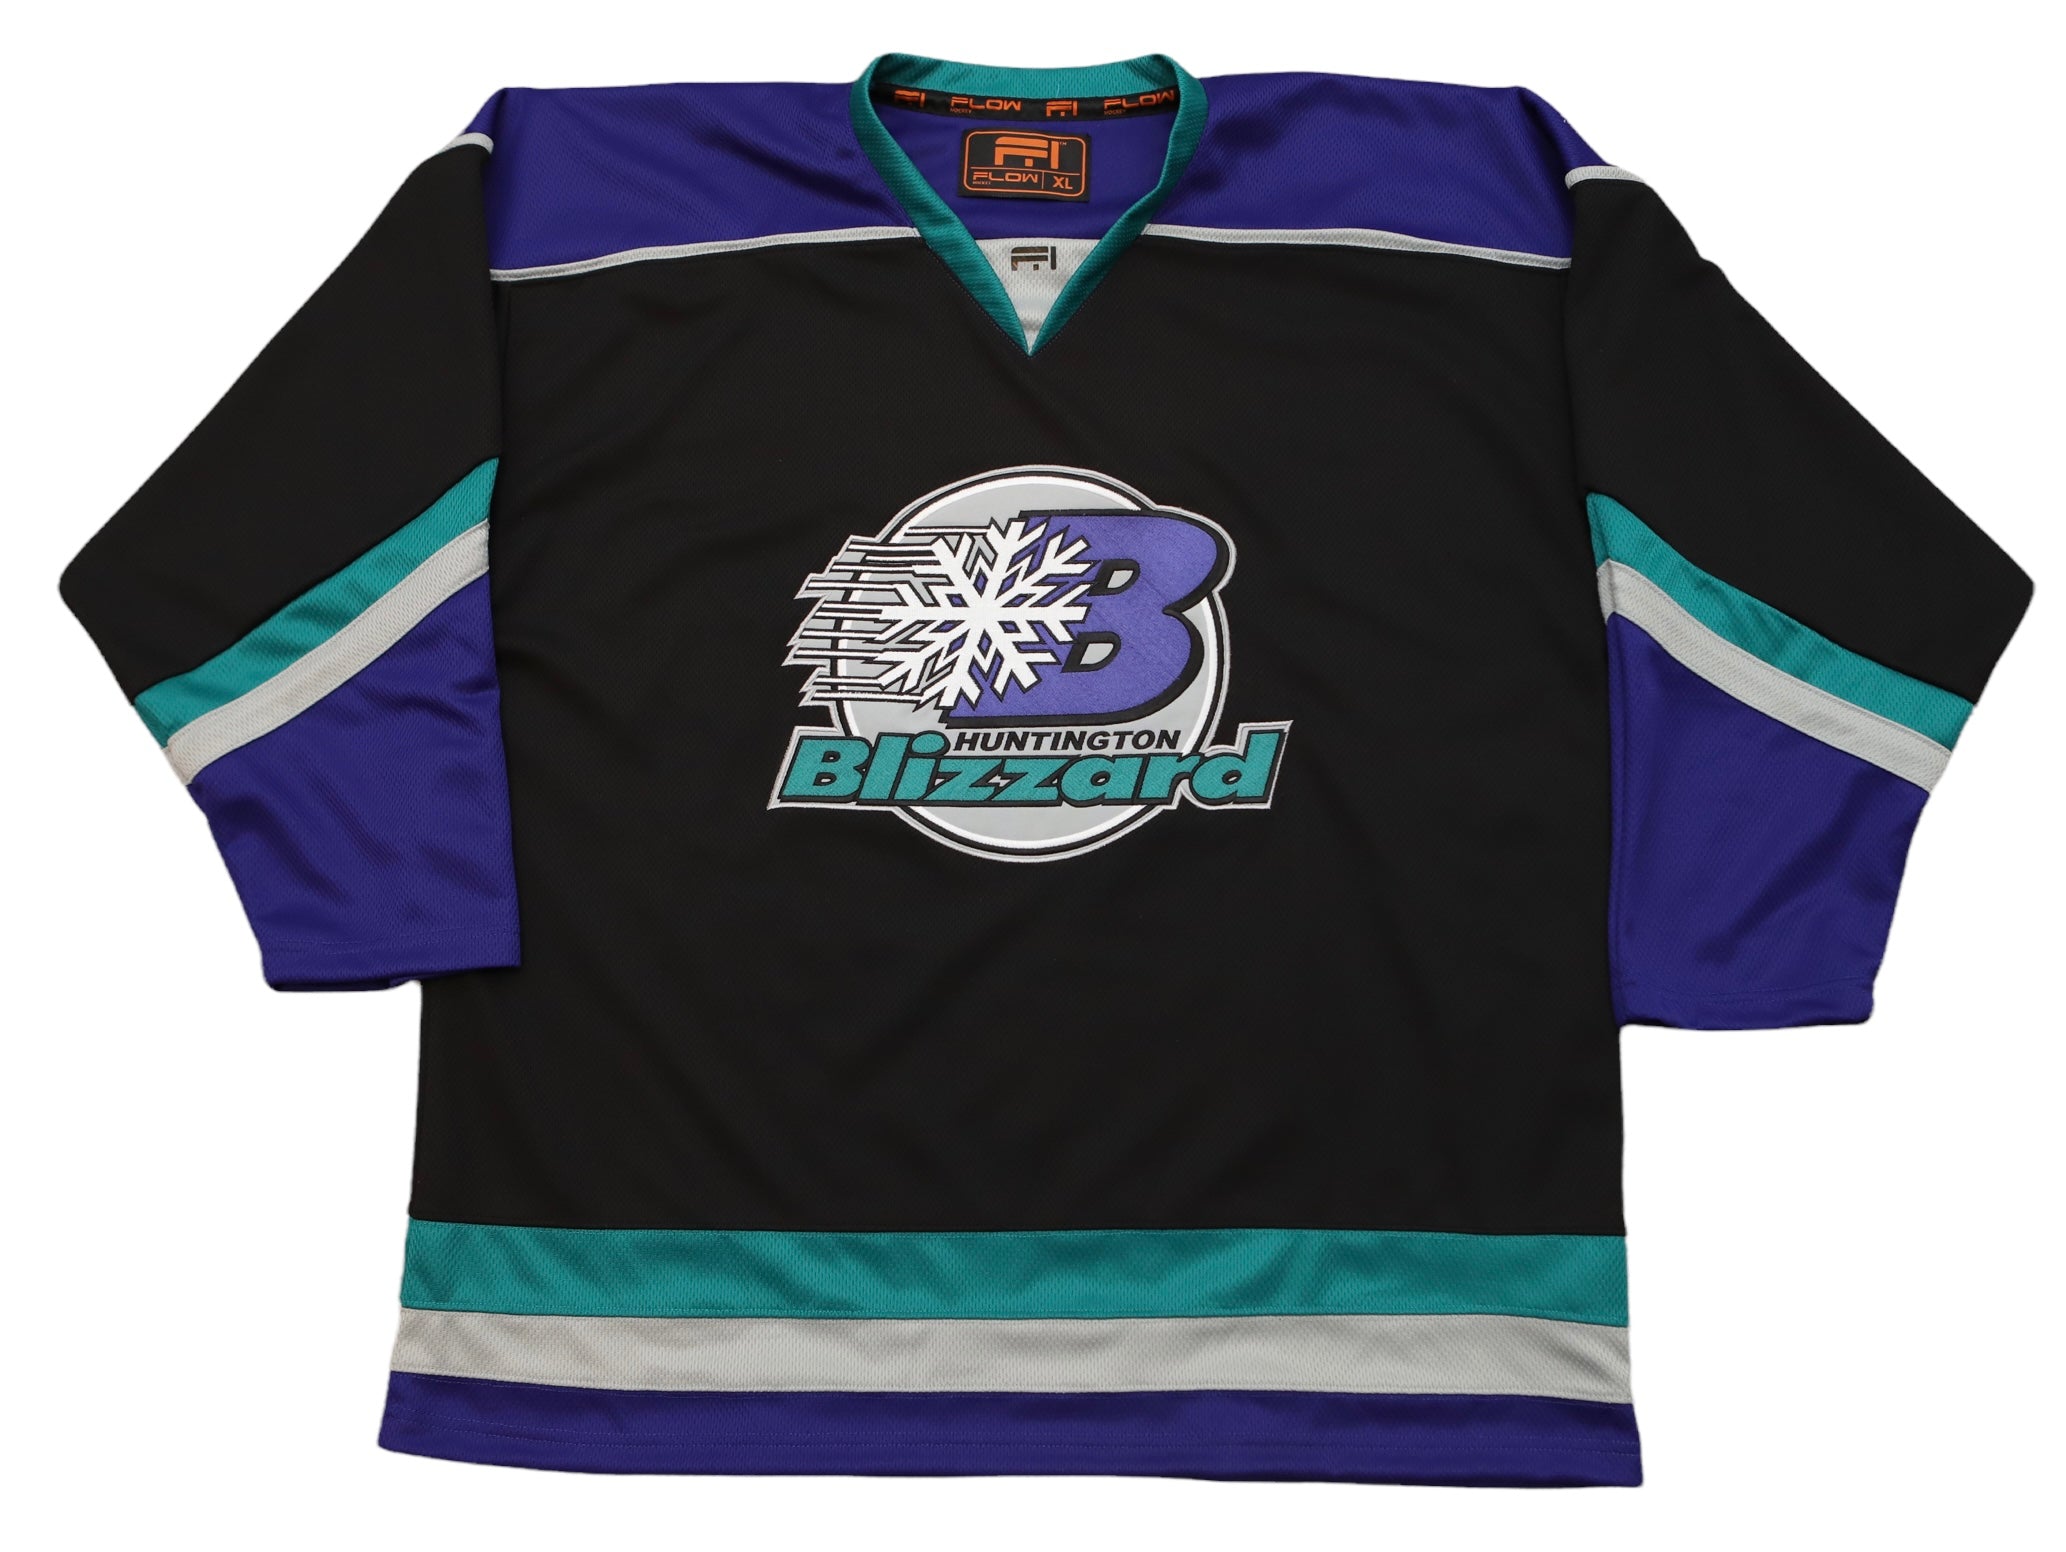 Seals Heritage Jersey Concept. Let me know your thoughts! : r/SanJoseSharks